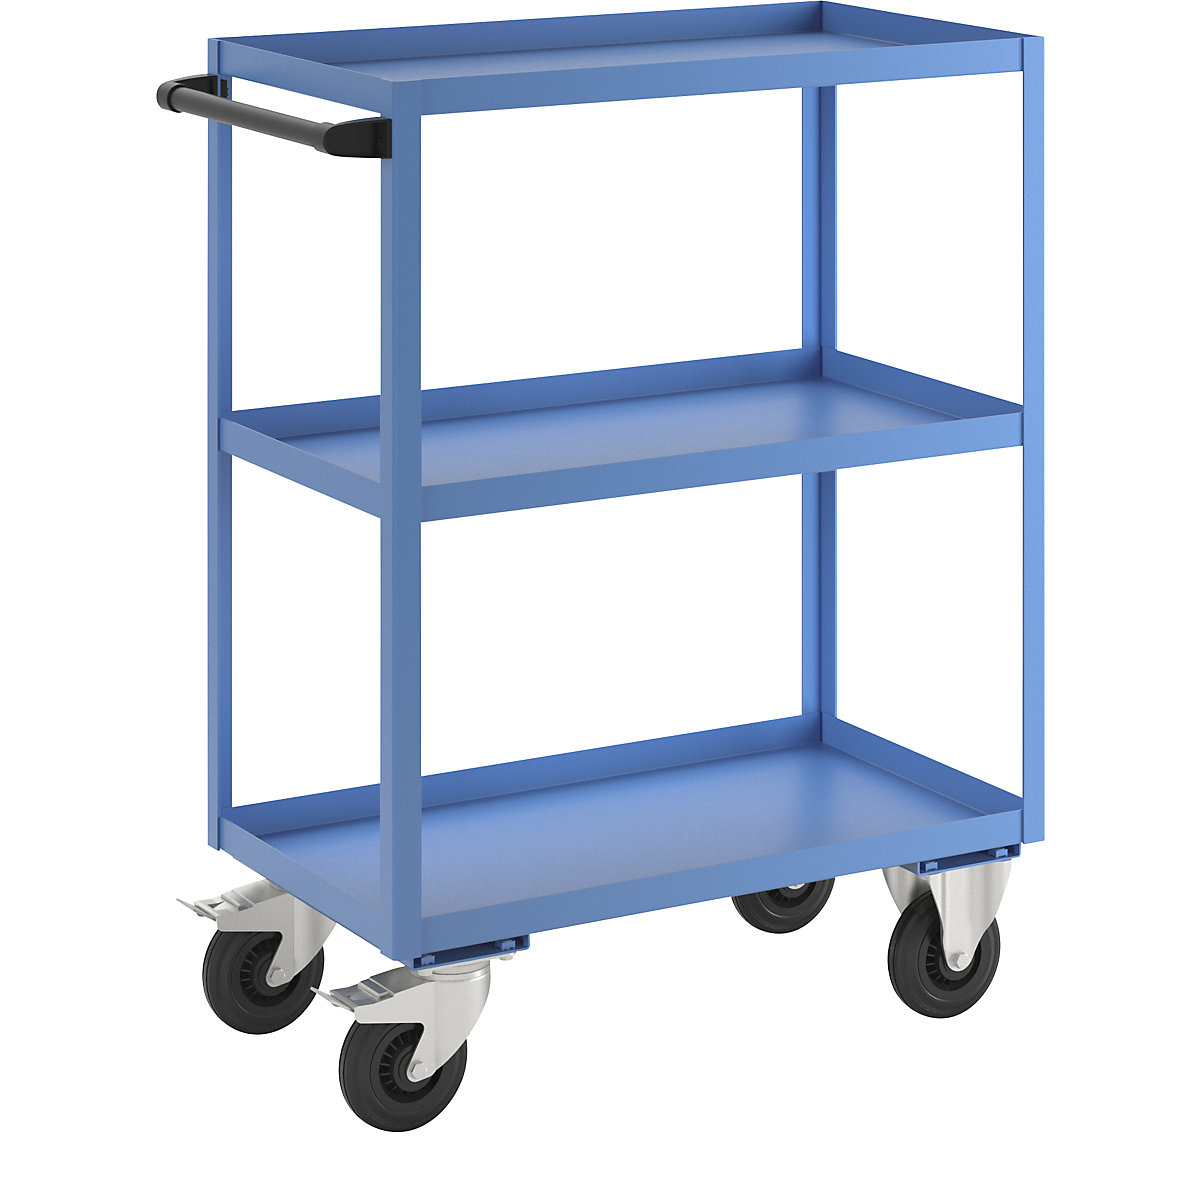 General purpose trolley – eurokraft pro, 3 shelves, max. load 350 kg, overall height 1215 mm, light blue-1